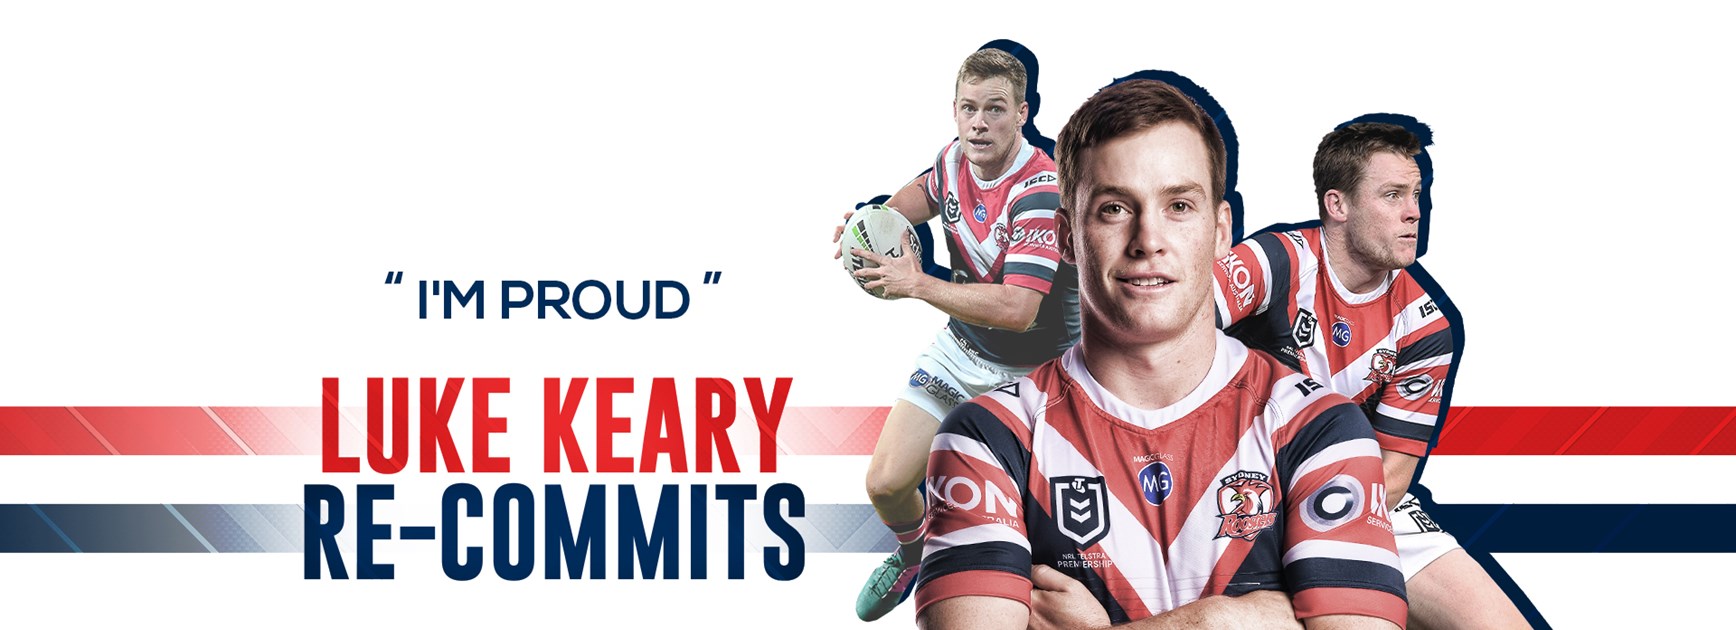 Luke Keary re-commits to Roosters